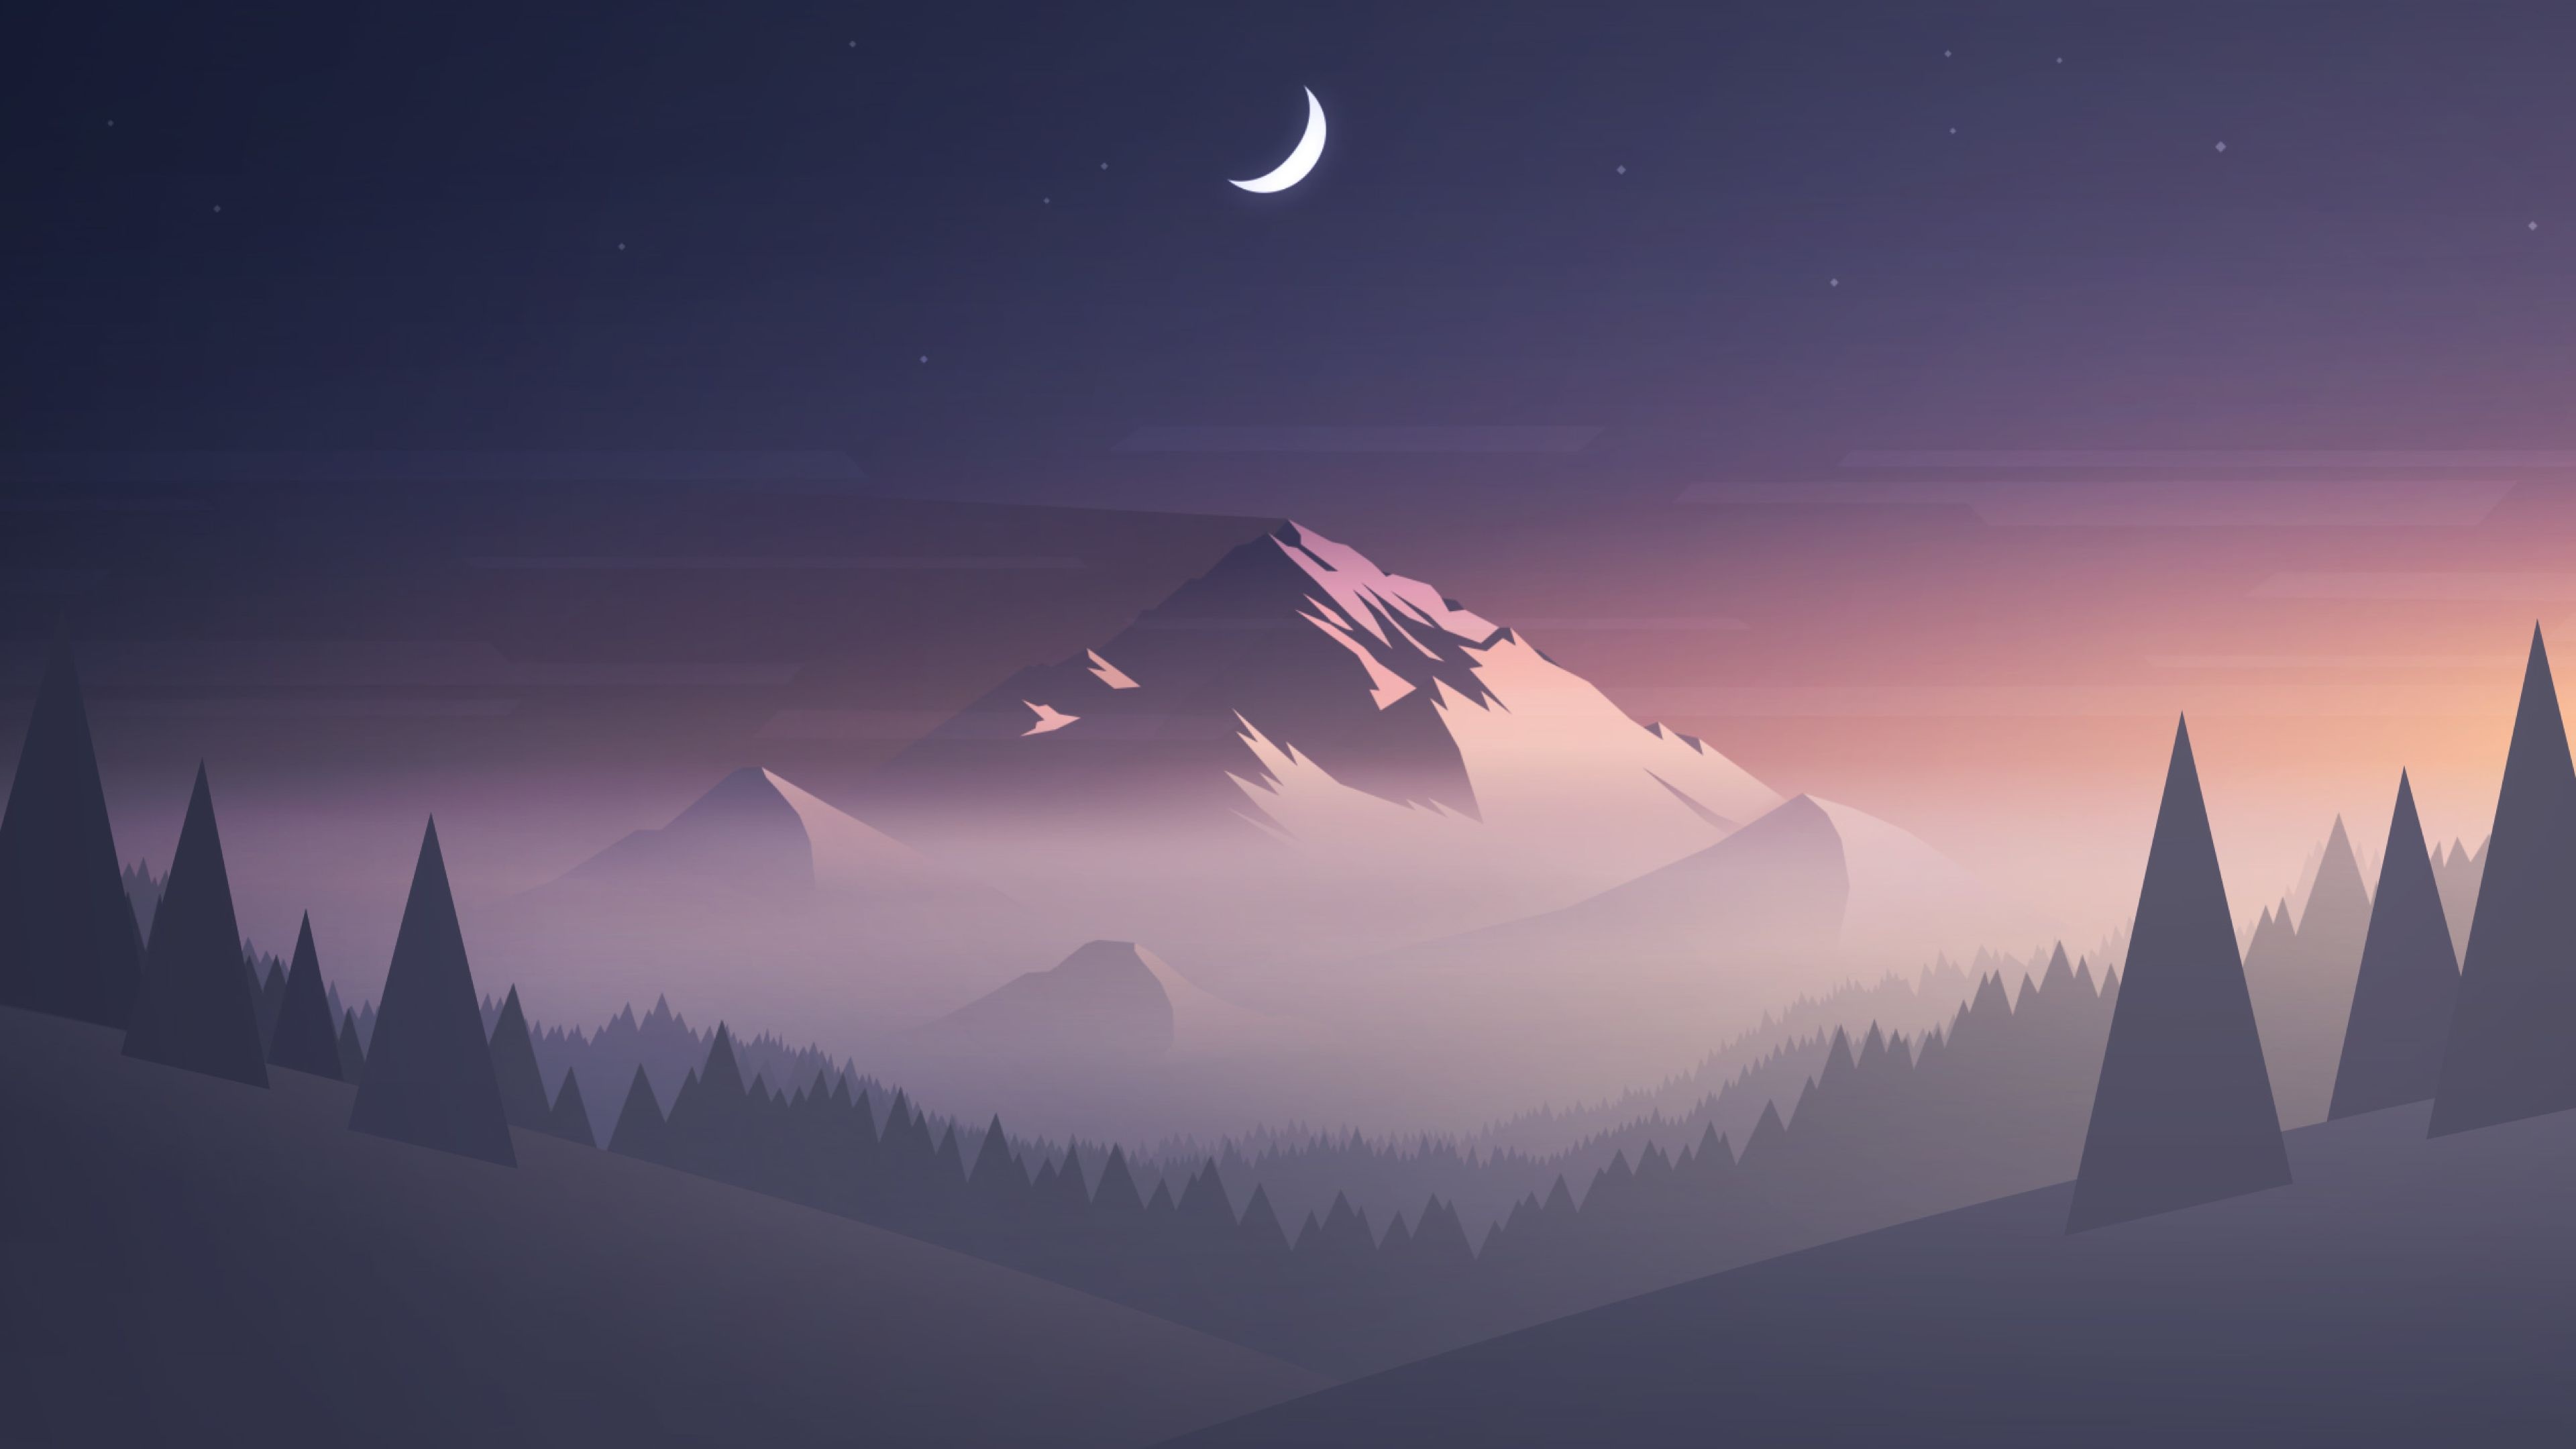 Moon amidst mountains, Minimalist scene, Natural tranquility, Tree silhouettes, Understated landscape, 3840x2160 4K Desktop